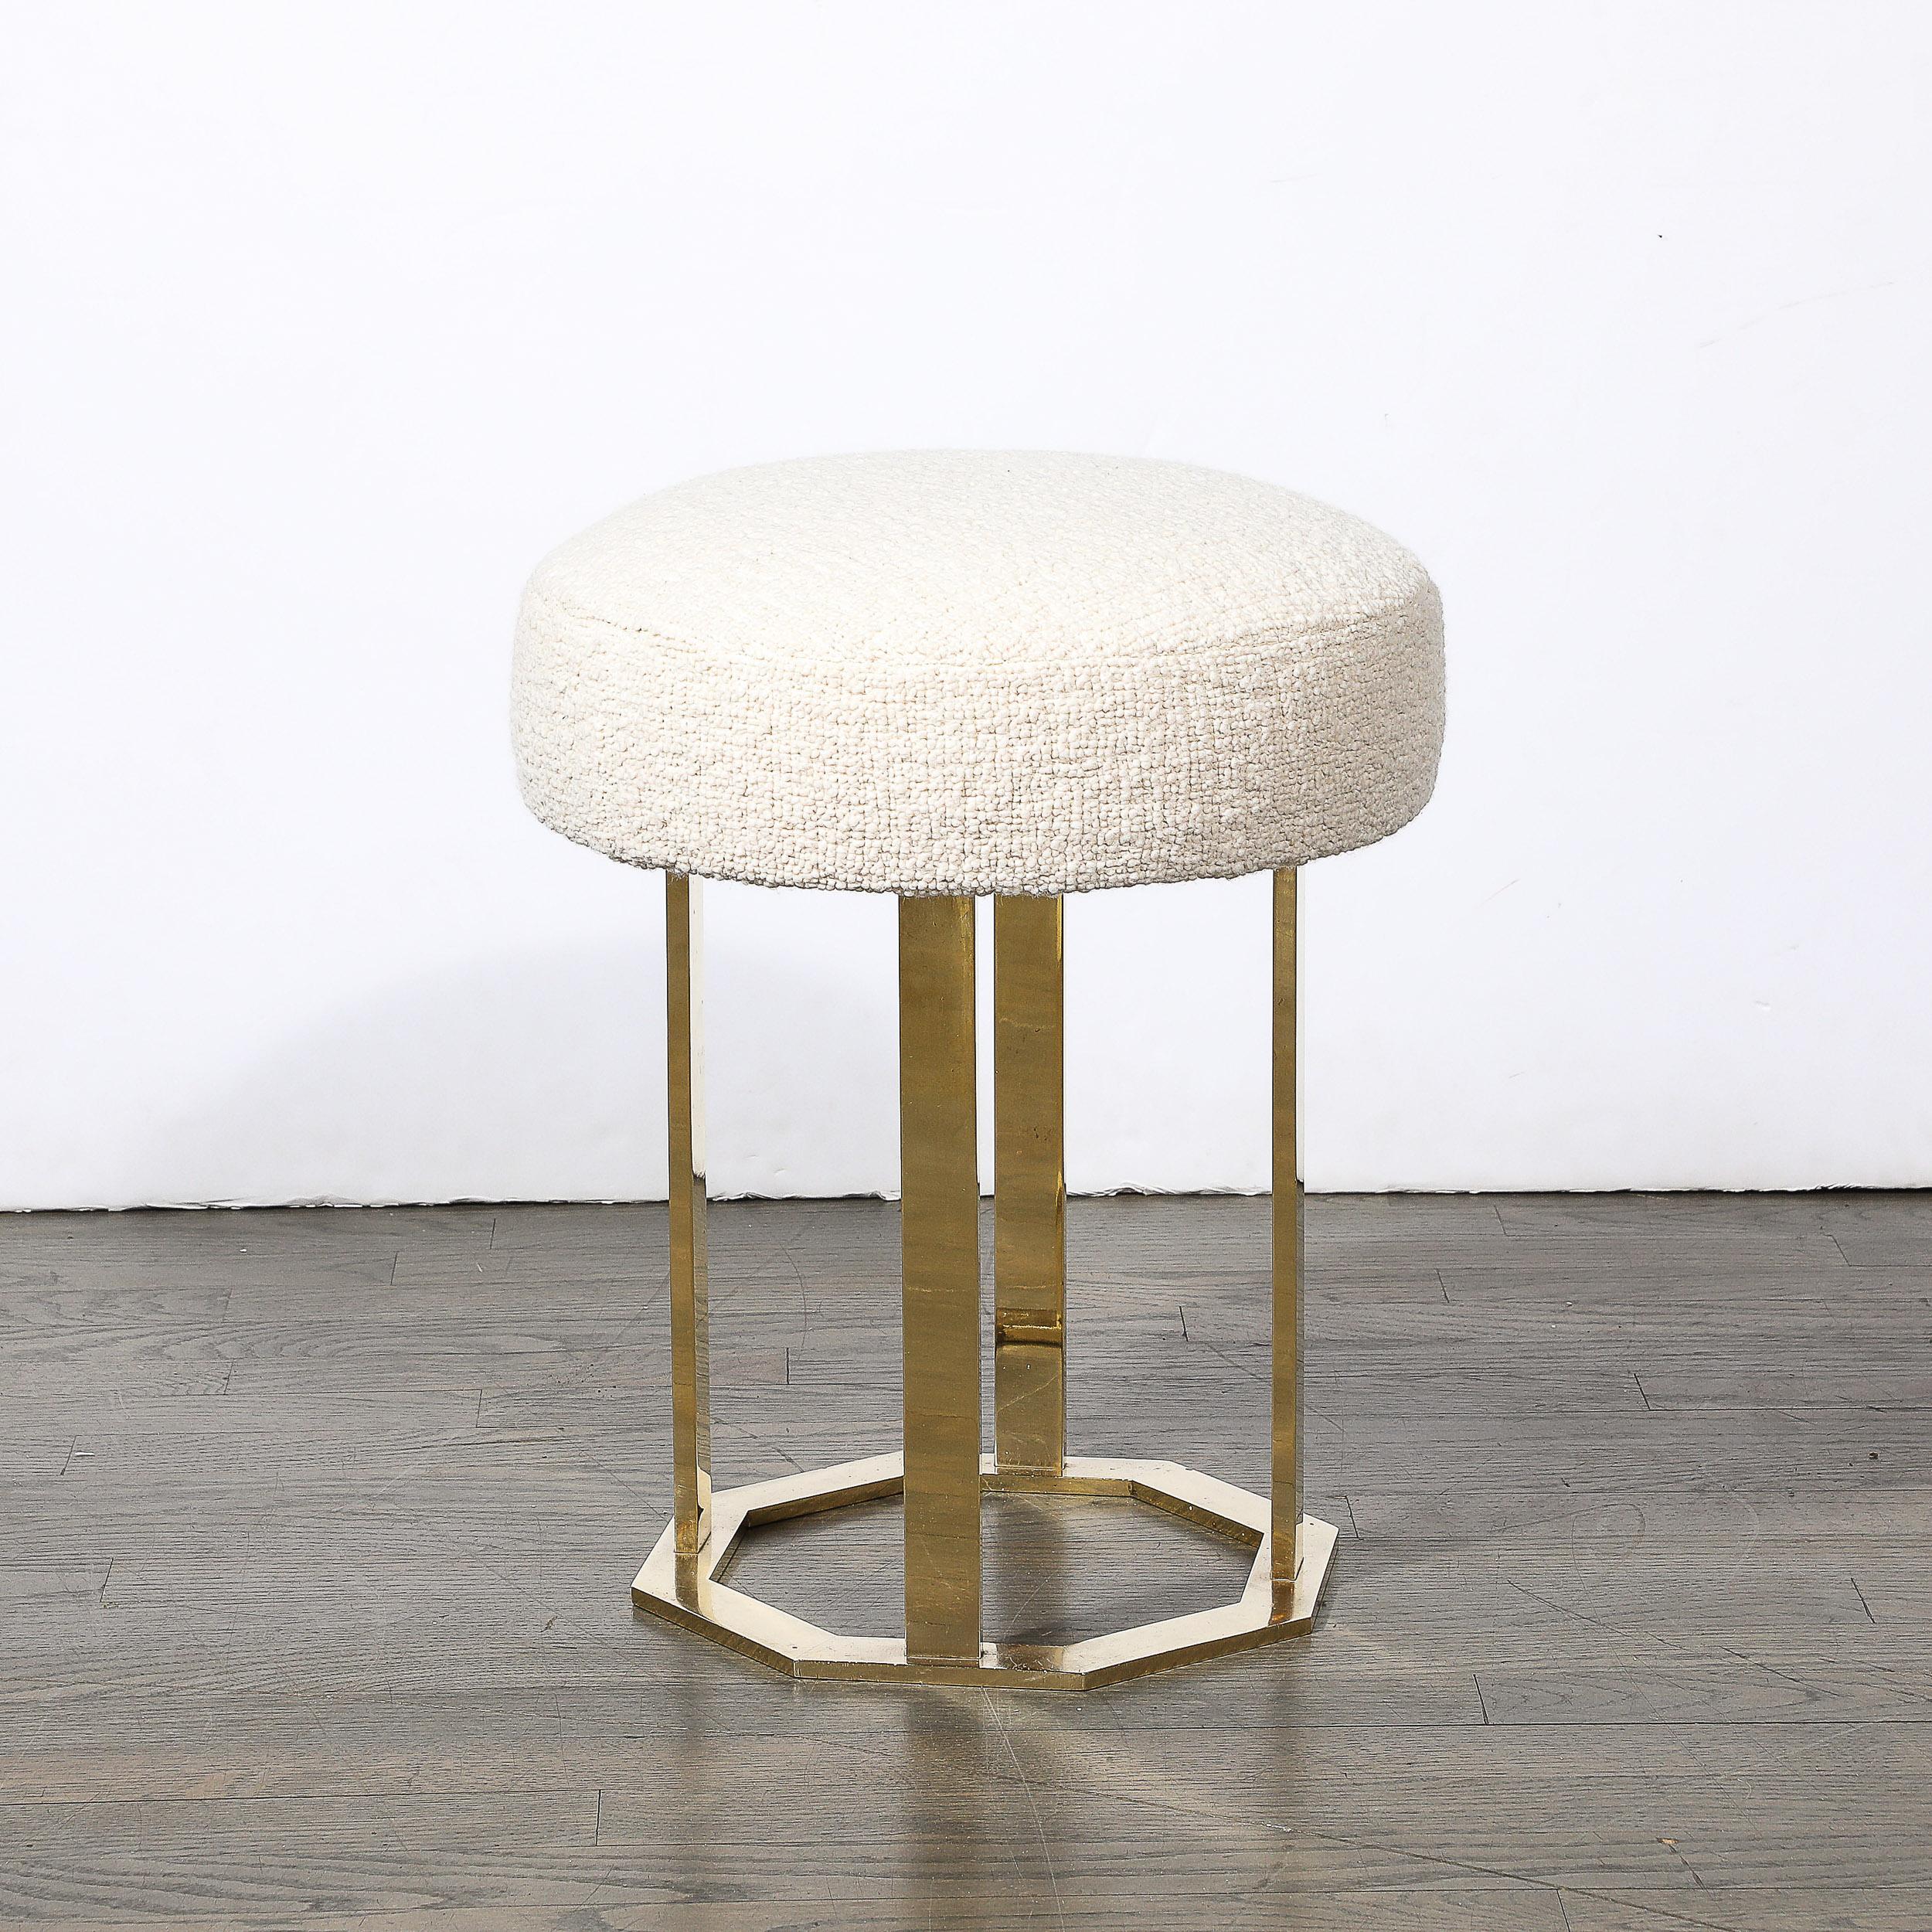 This well balanced and geometric Mid-Century Modernist Stool W/Octagonal Polished Brass Base in Holly Hunt Boucle originates from the United States, Circa 1970. Features a rounded cylindrical seat upholstered in a sumptuous and beautifully textured